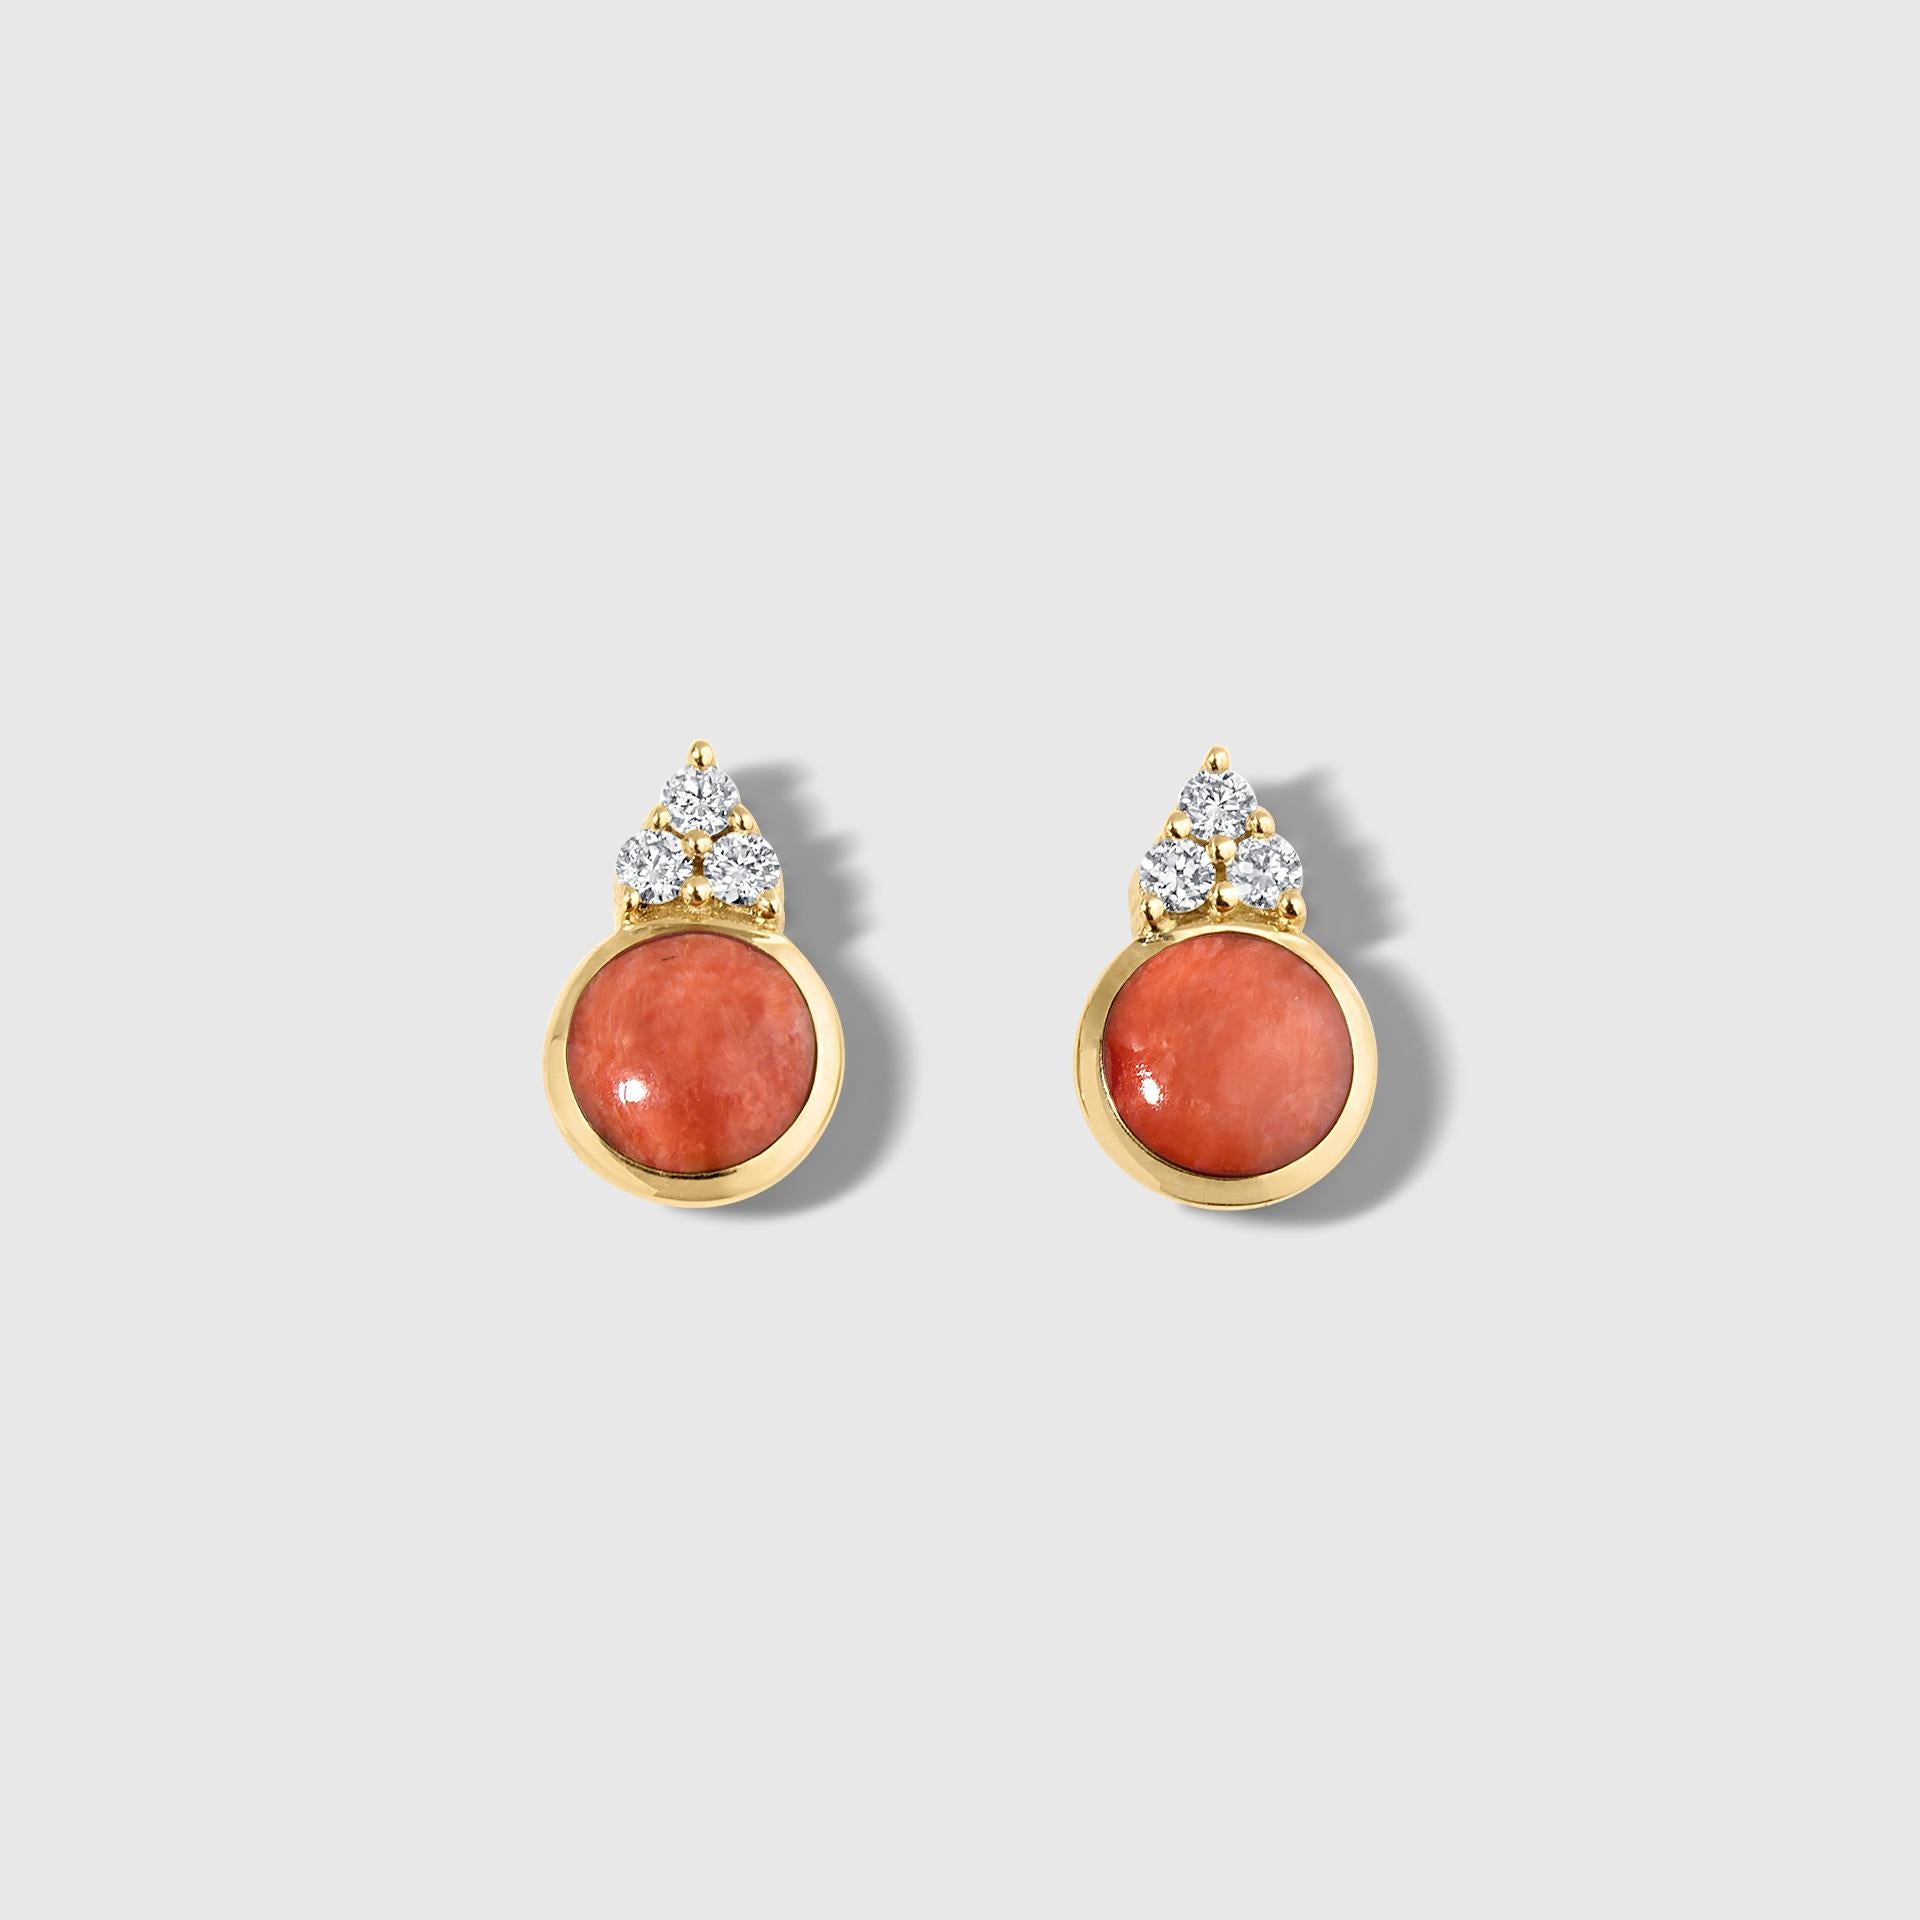 Small Post Earrings with Red Spiny Oyster and Diamond Detail, 14kt Gold

All designs may be custom-ordered in many of Kabana’s stones, including: sleeping beauty turquoise, turquoise, four-star opal, five-star-high-grade opal, black onyx, red or